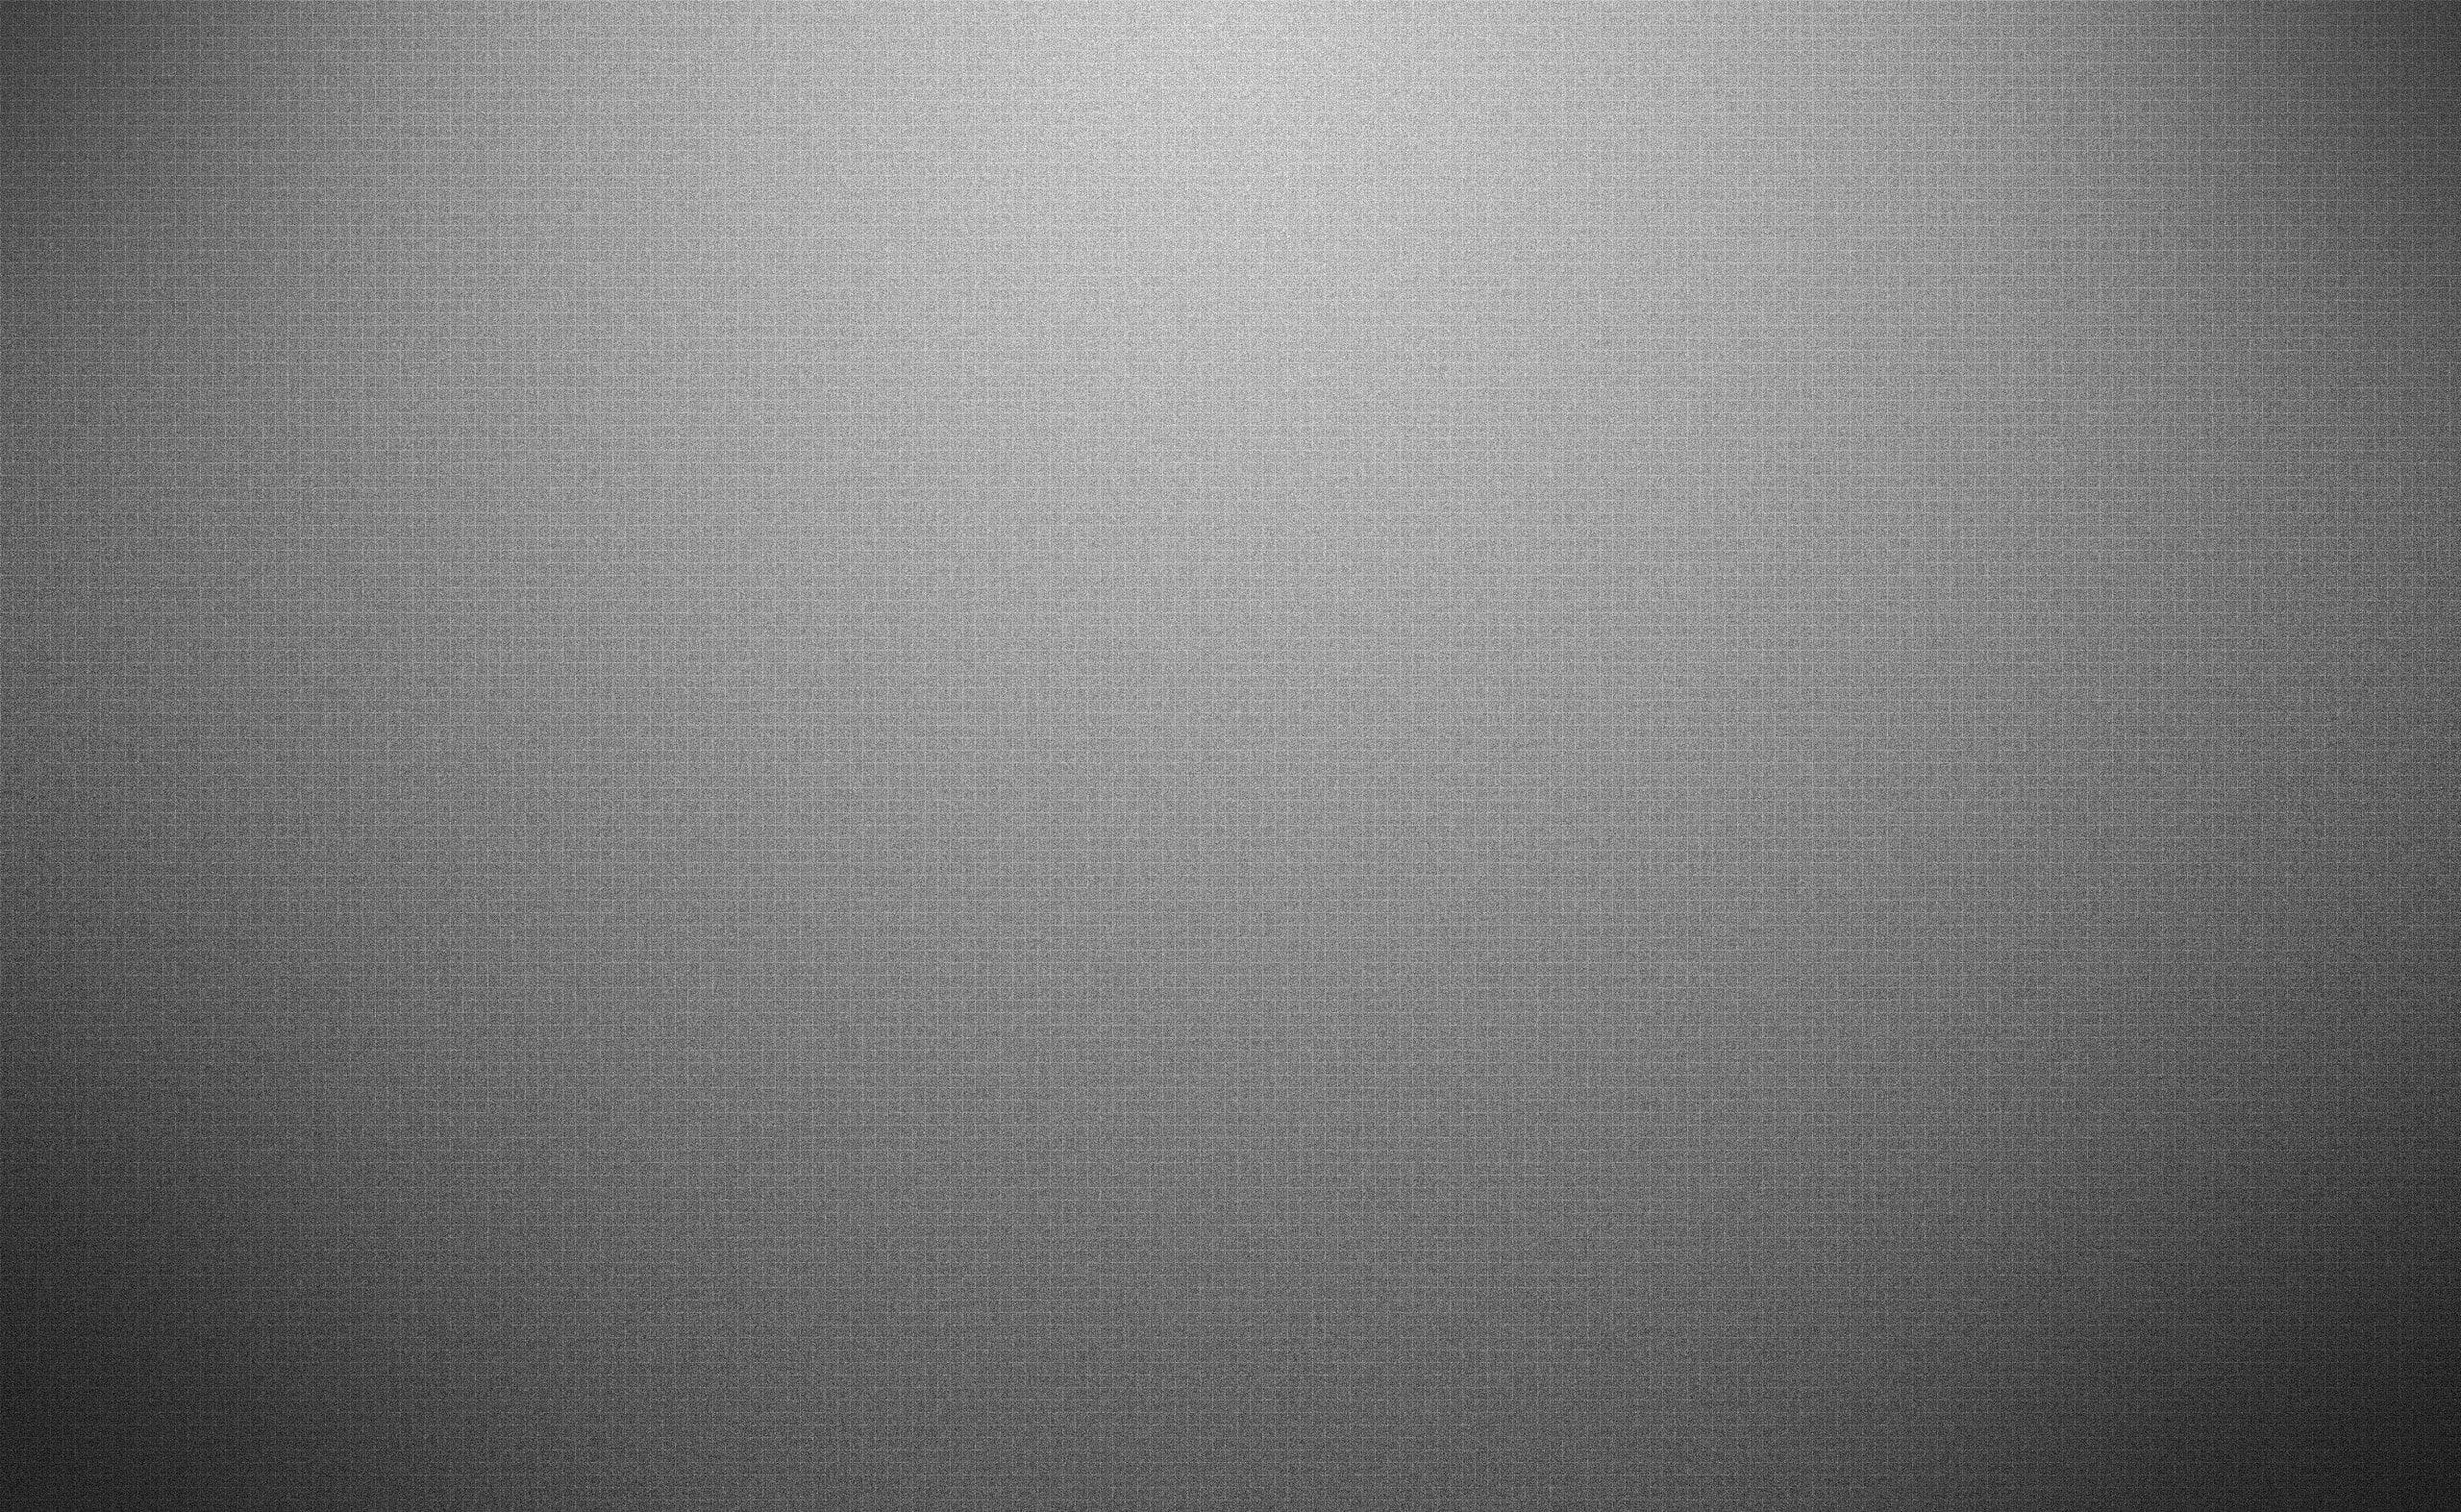 Light Gray, Aero, Patterns, backgrounds, textured, no people